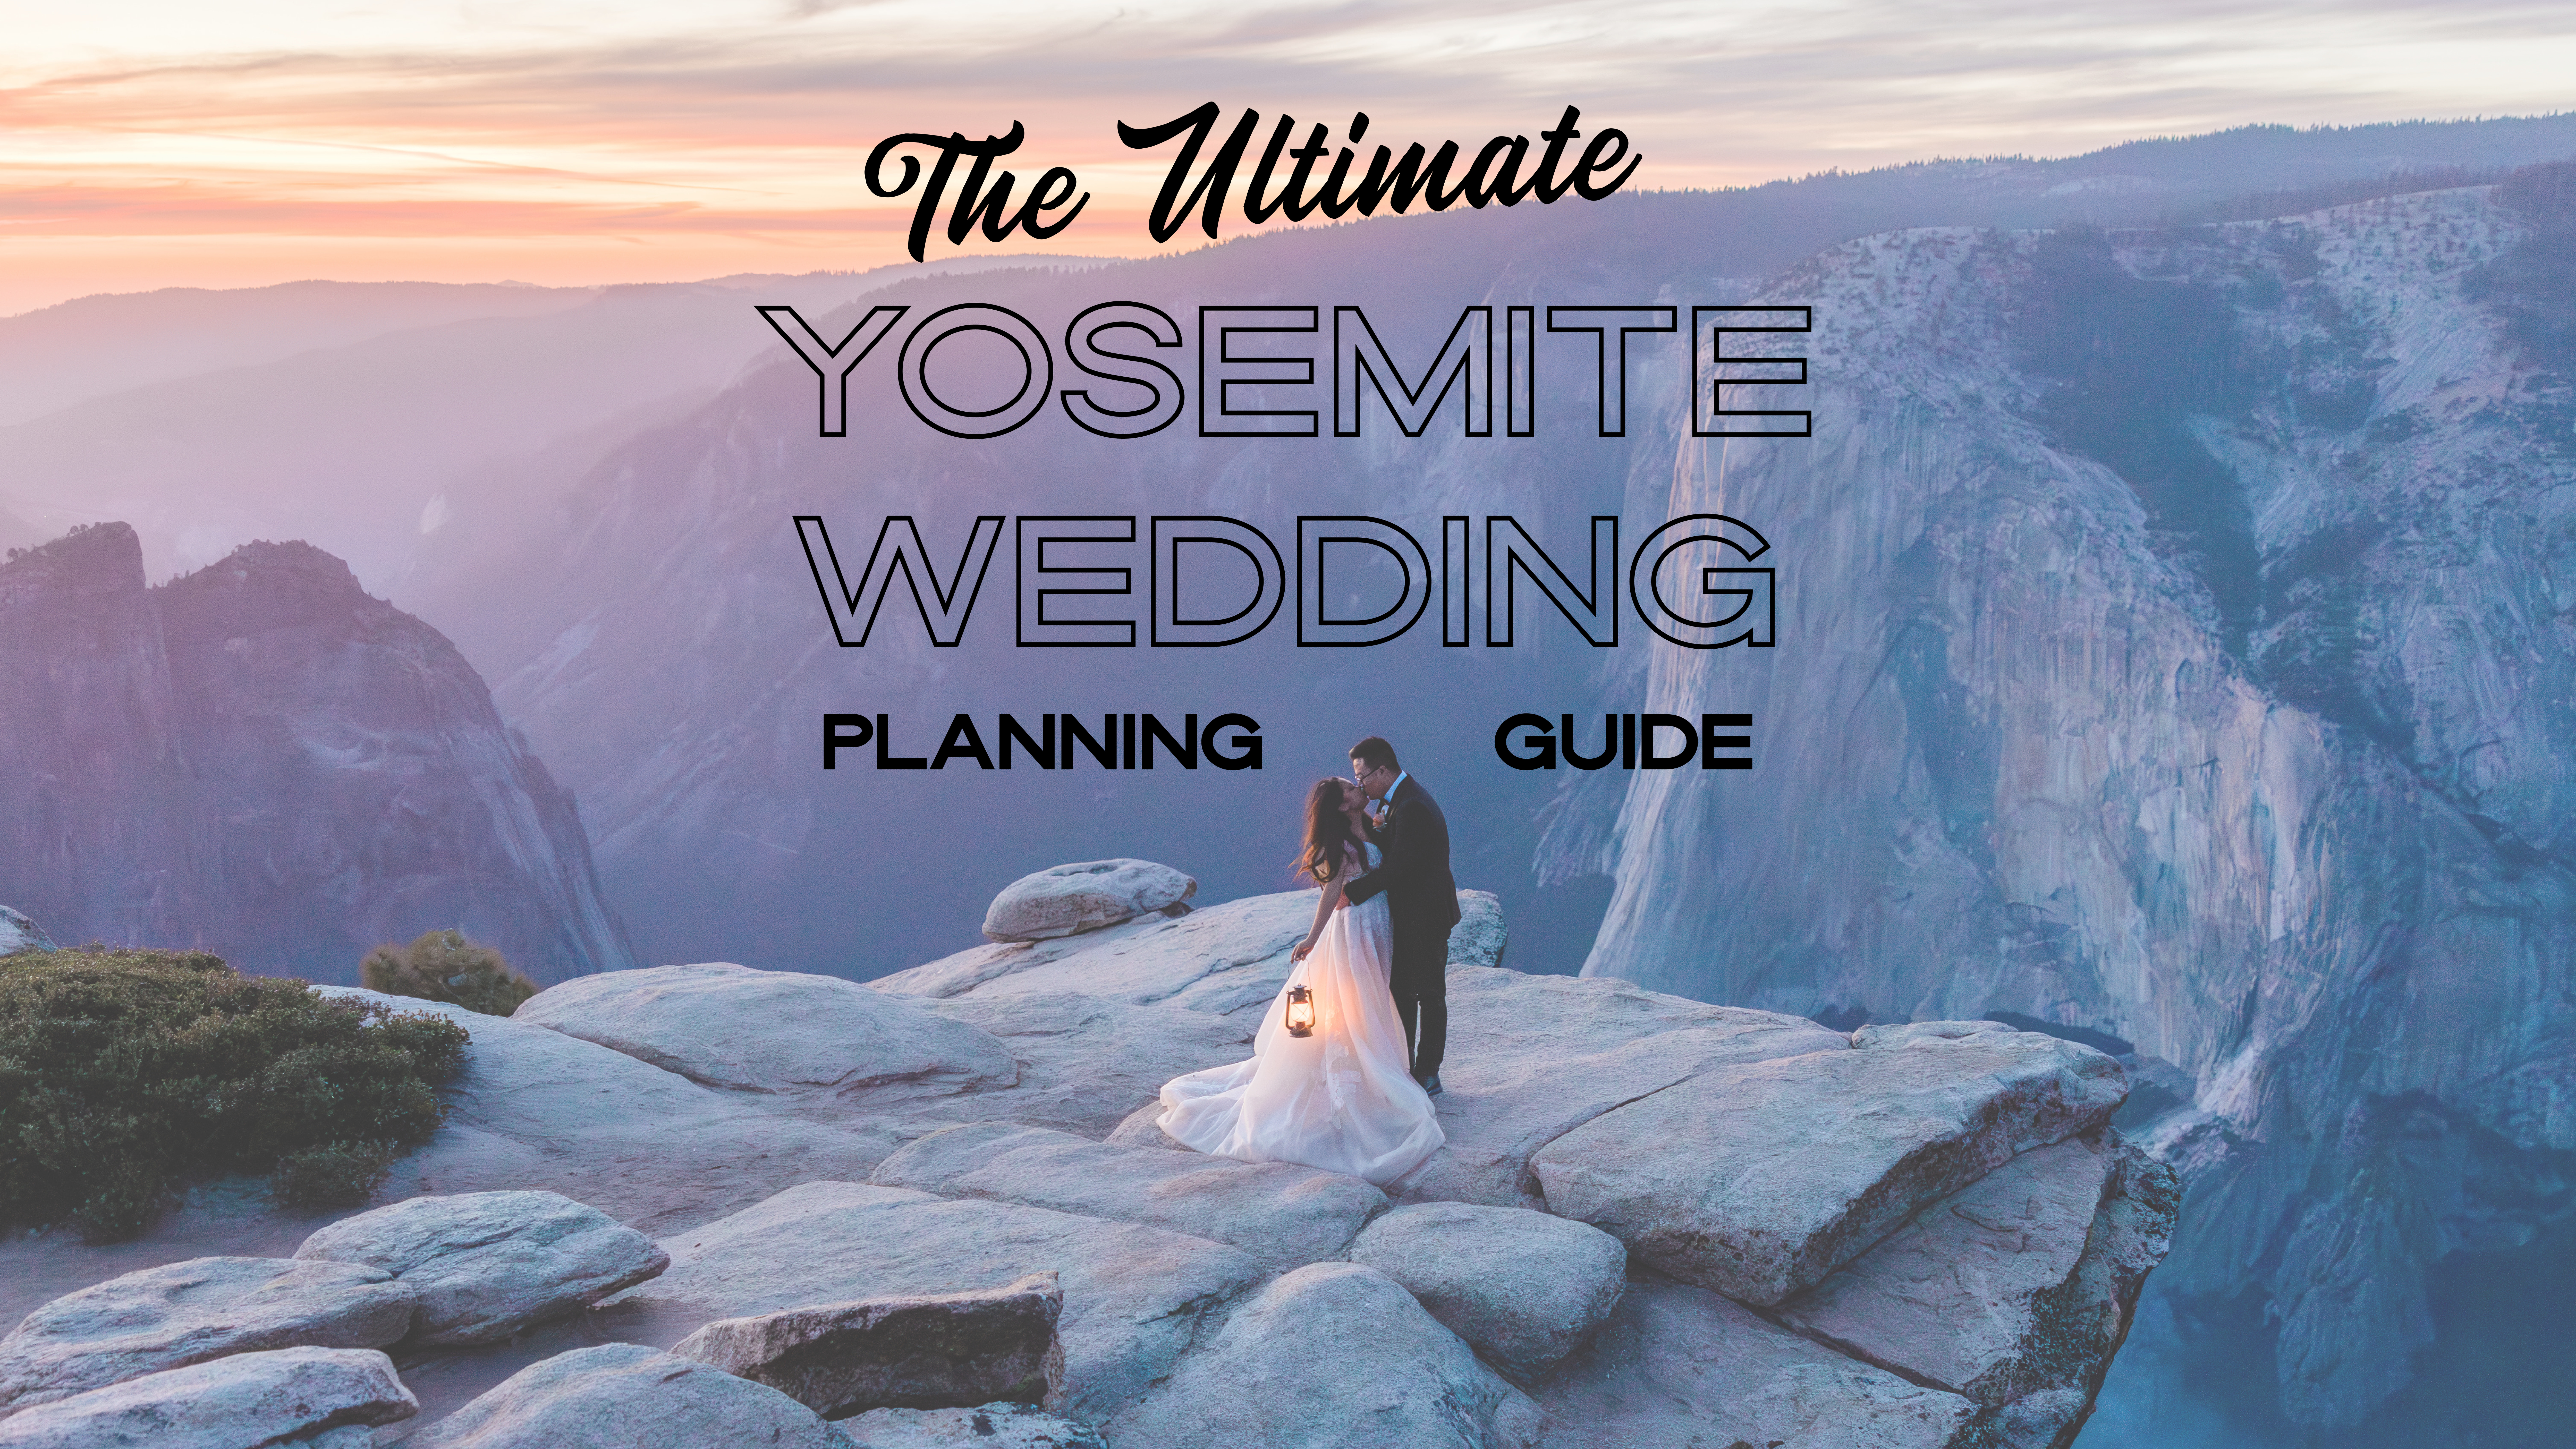 Yosemite-Wedding-Guide Your Ultimate Guide to a Magical Yosemite Wedding Experience